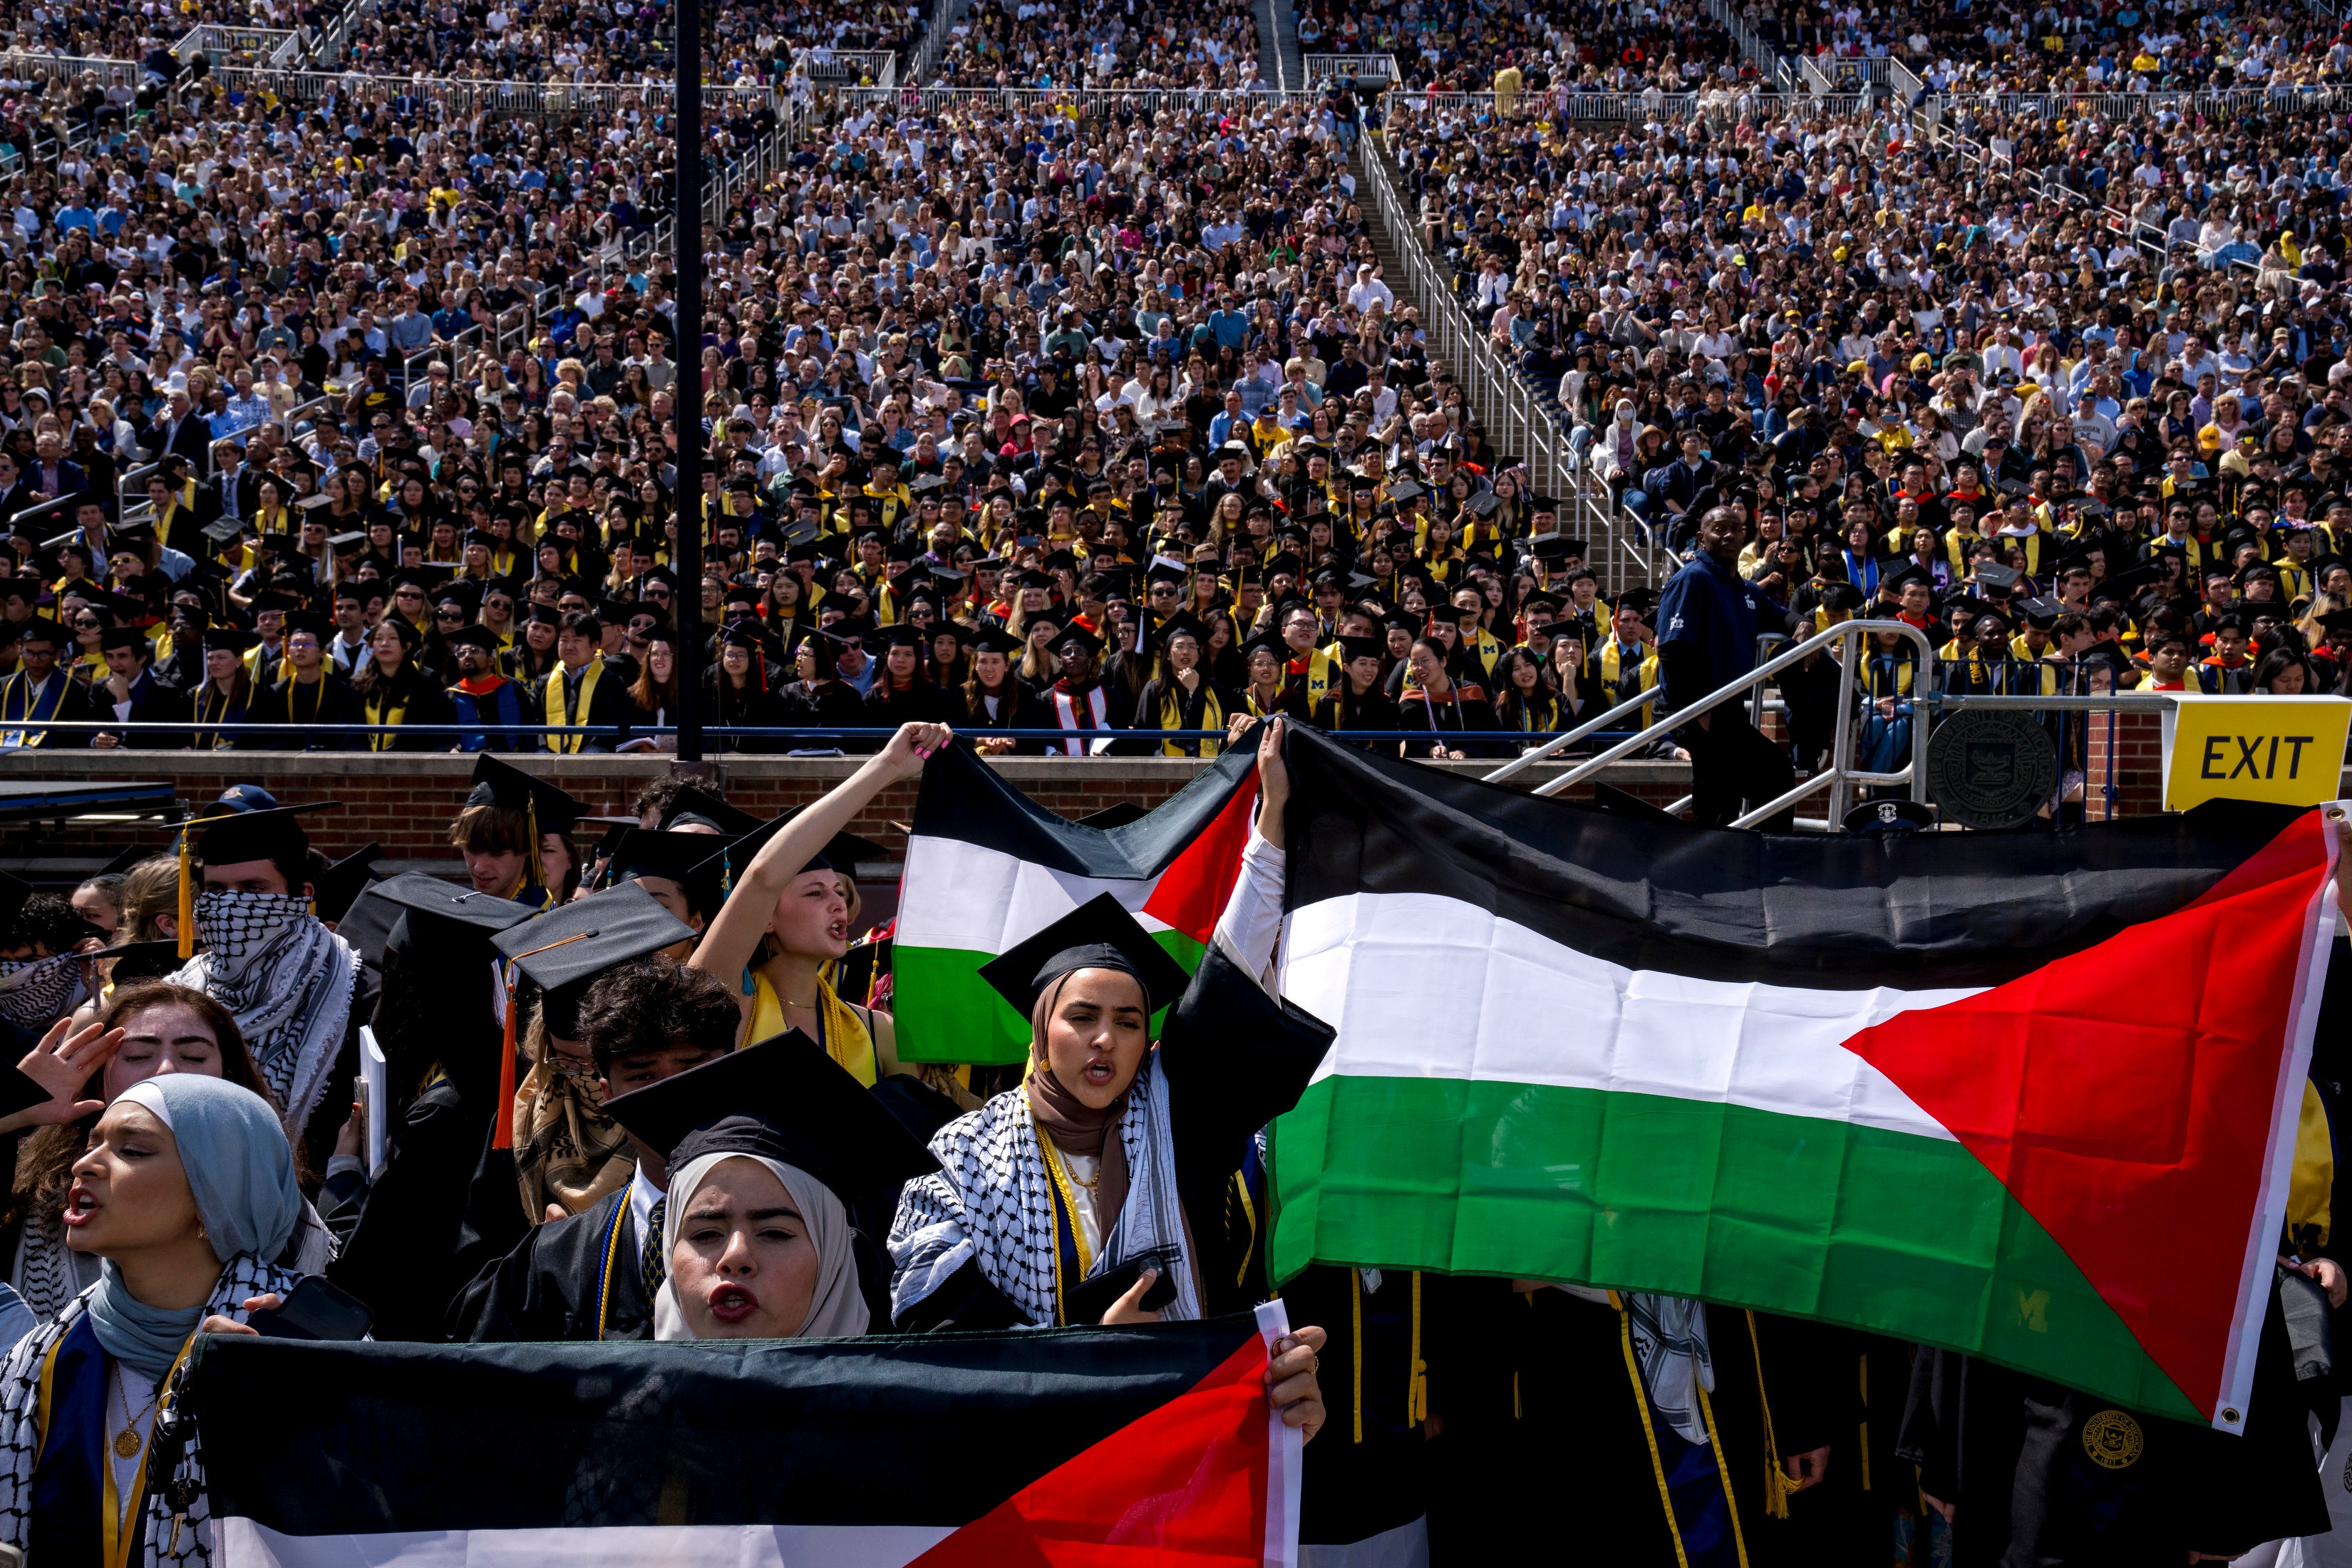 Salma Hamamy, center, holds a Flag of Palestine during a Pro-Palestinian protest during the University of Michigan's spring commencement ceremony